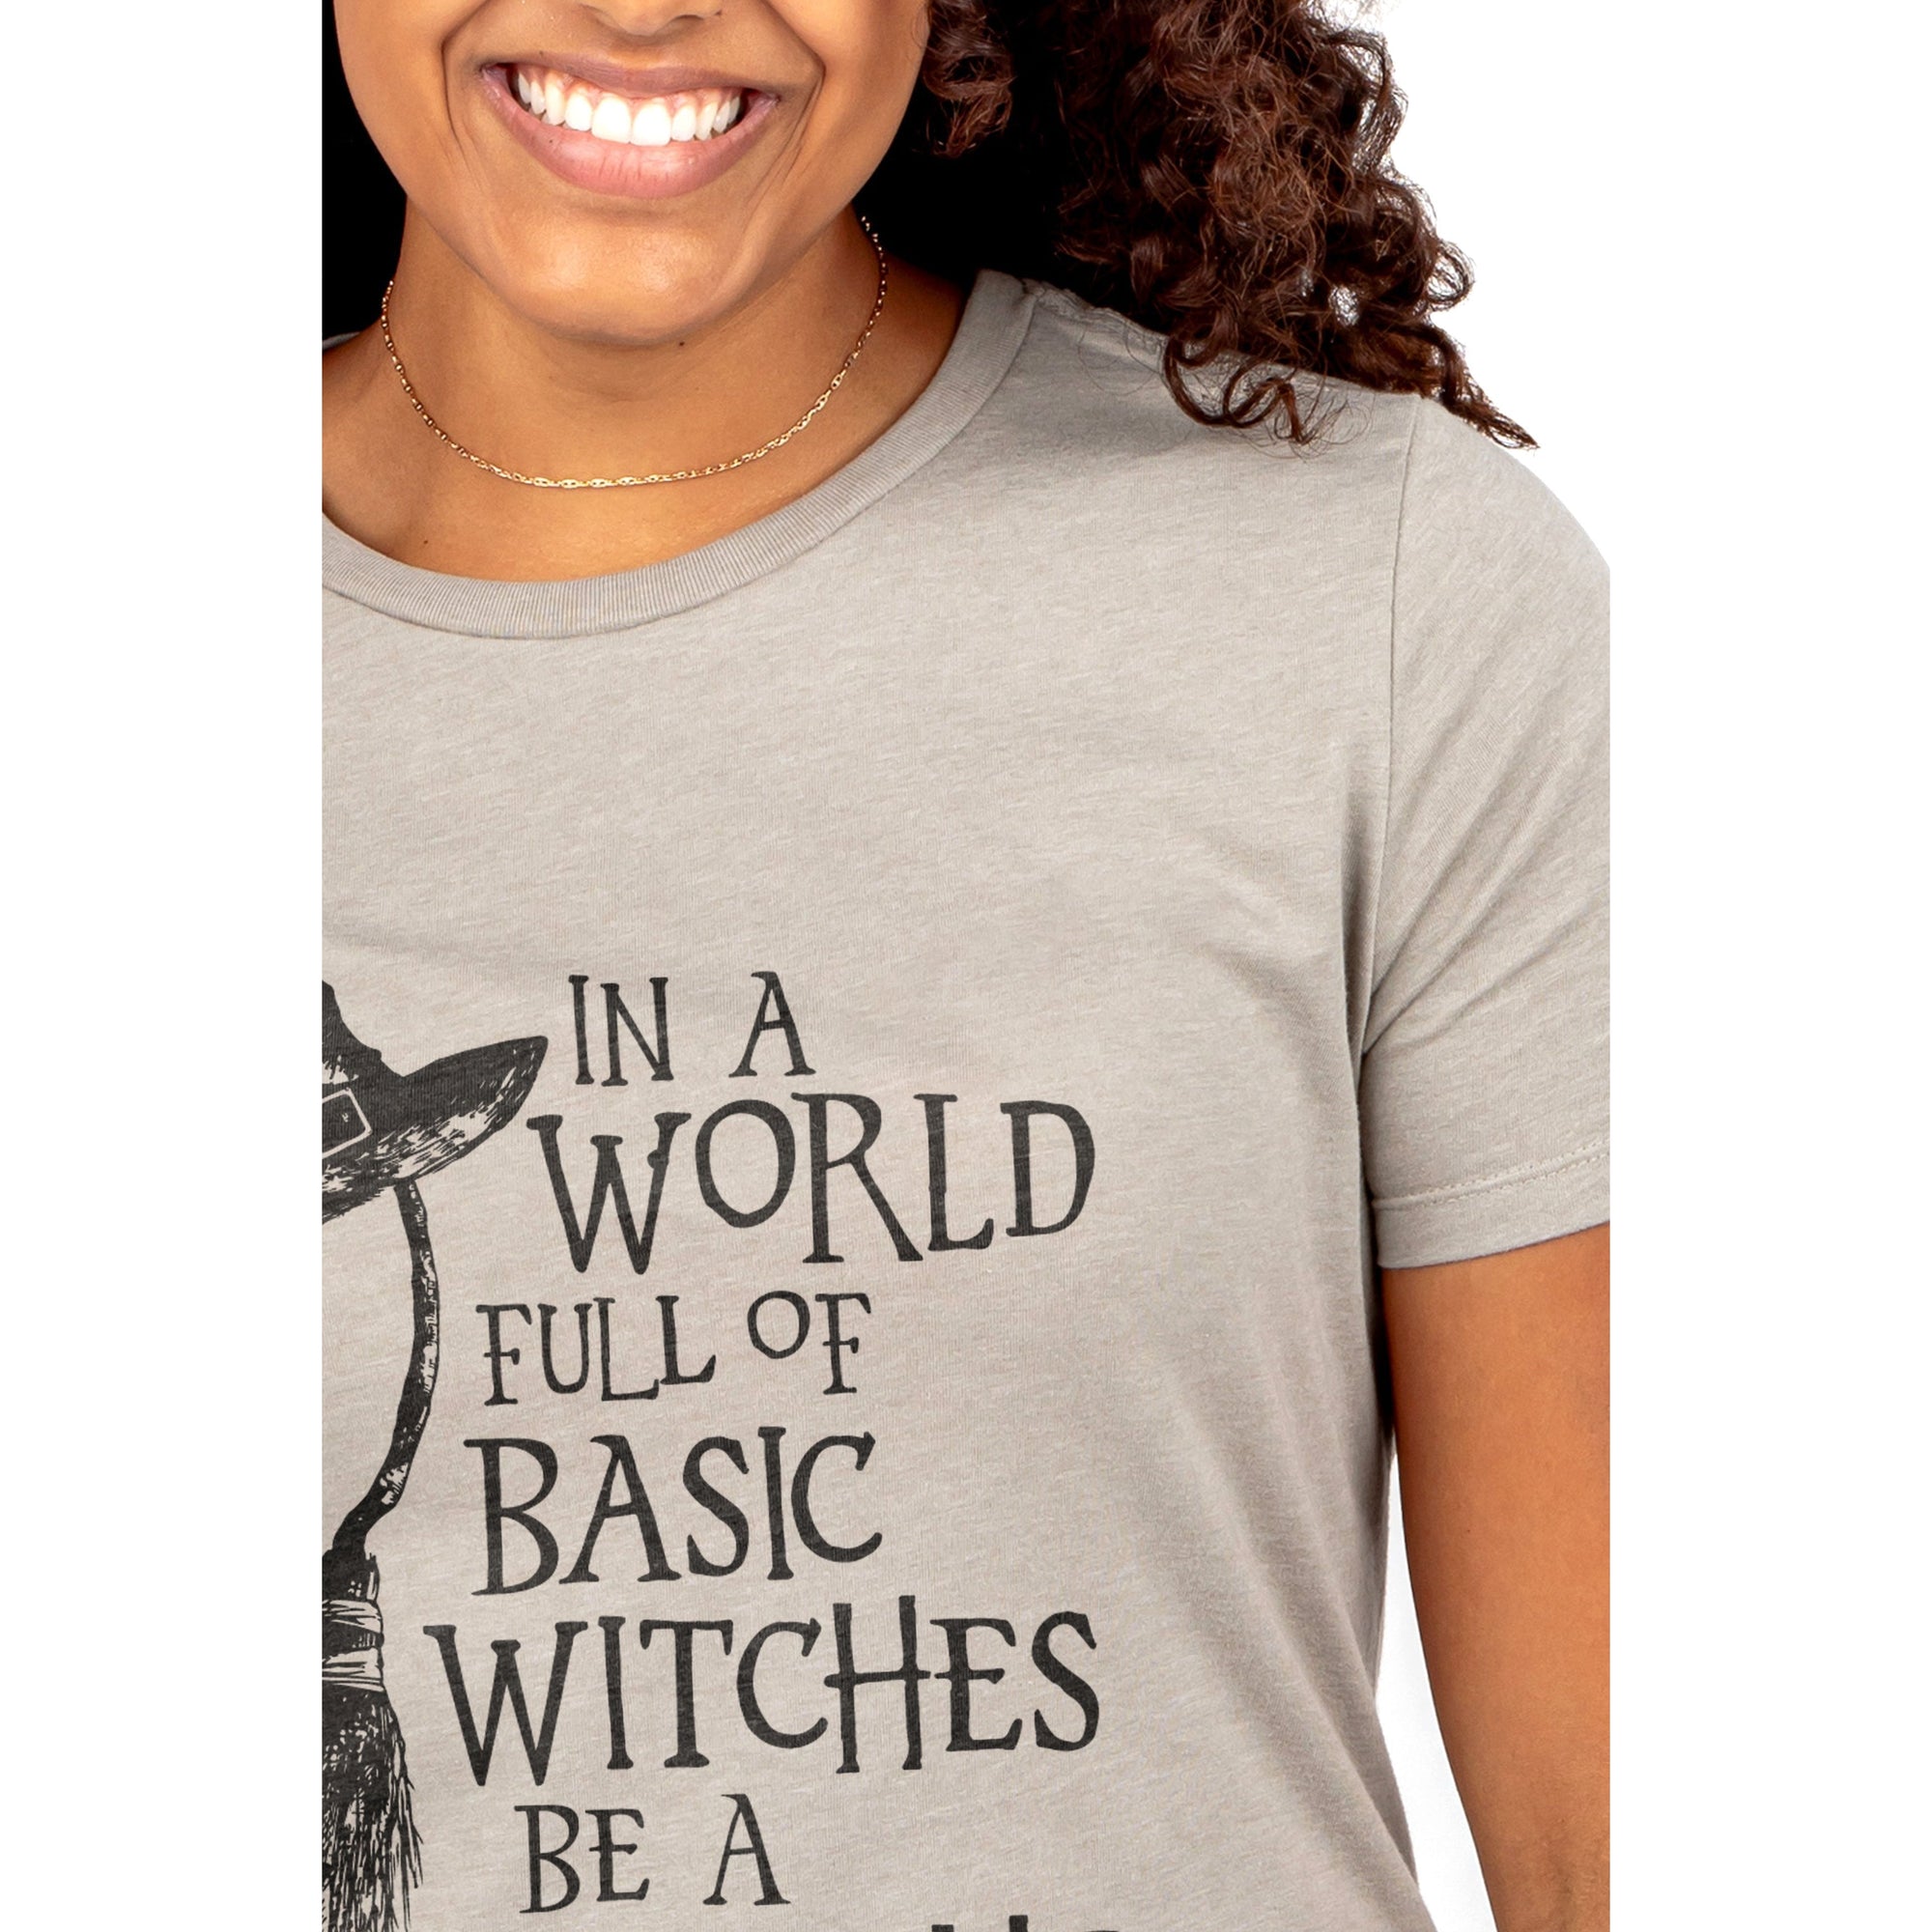 Basic Witches Be A Samantha